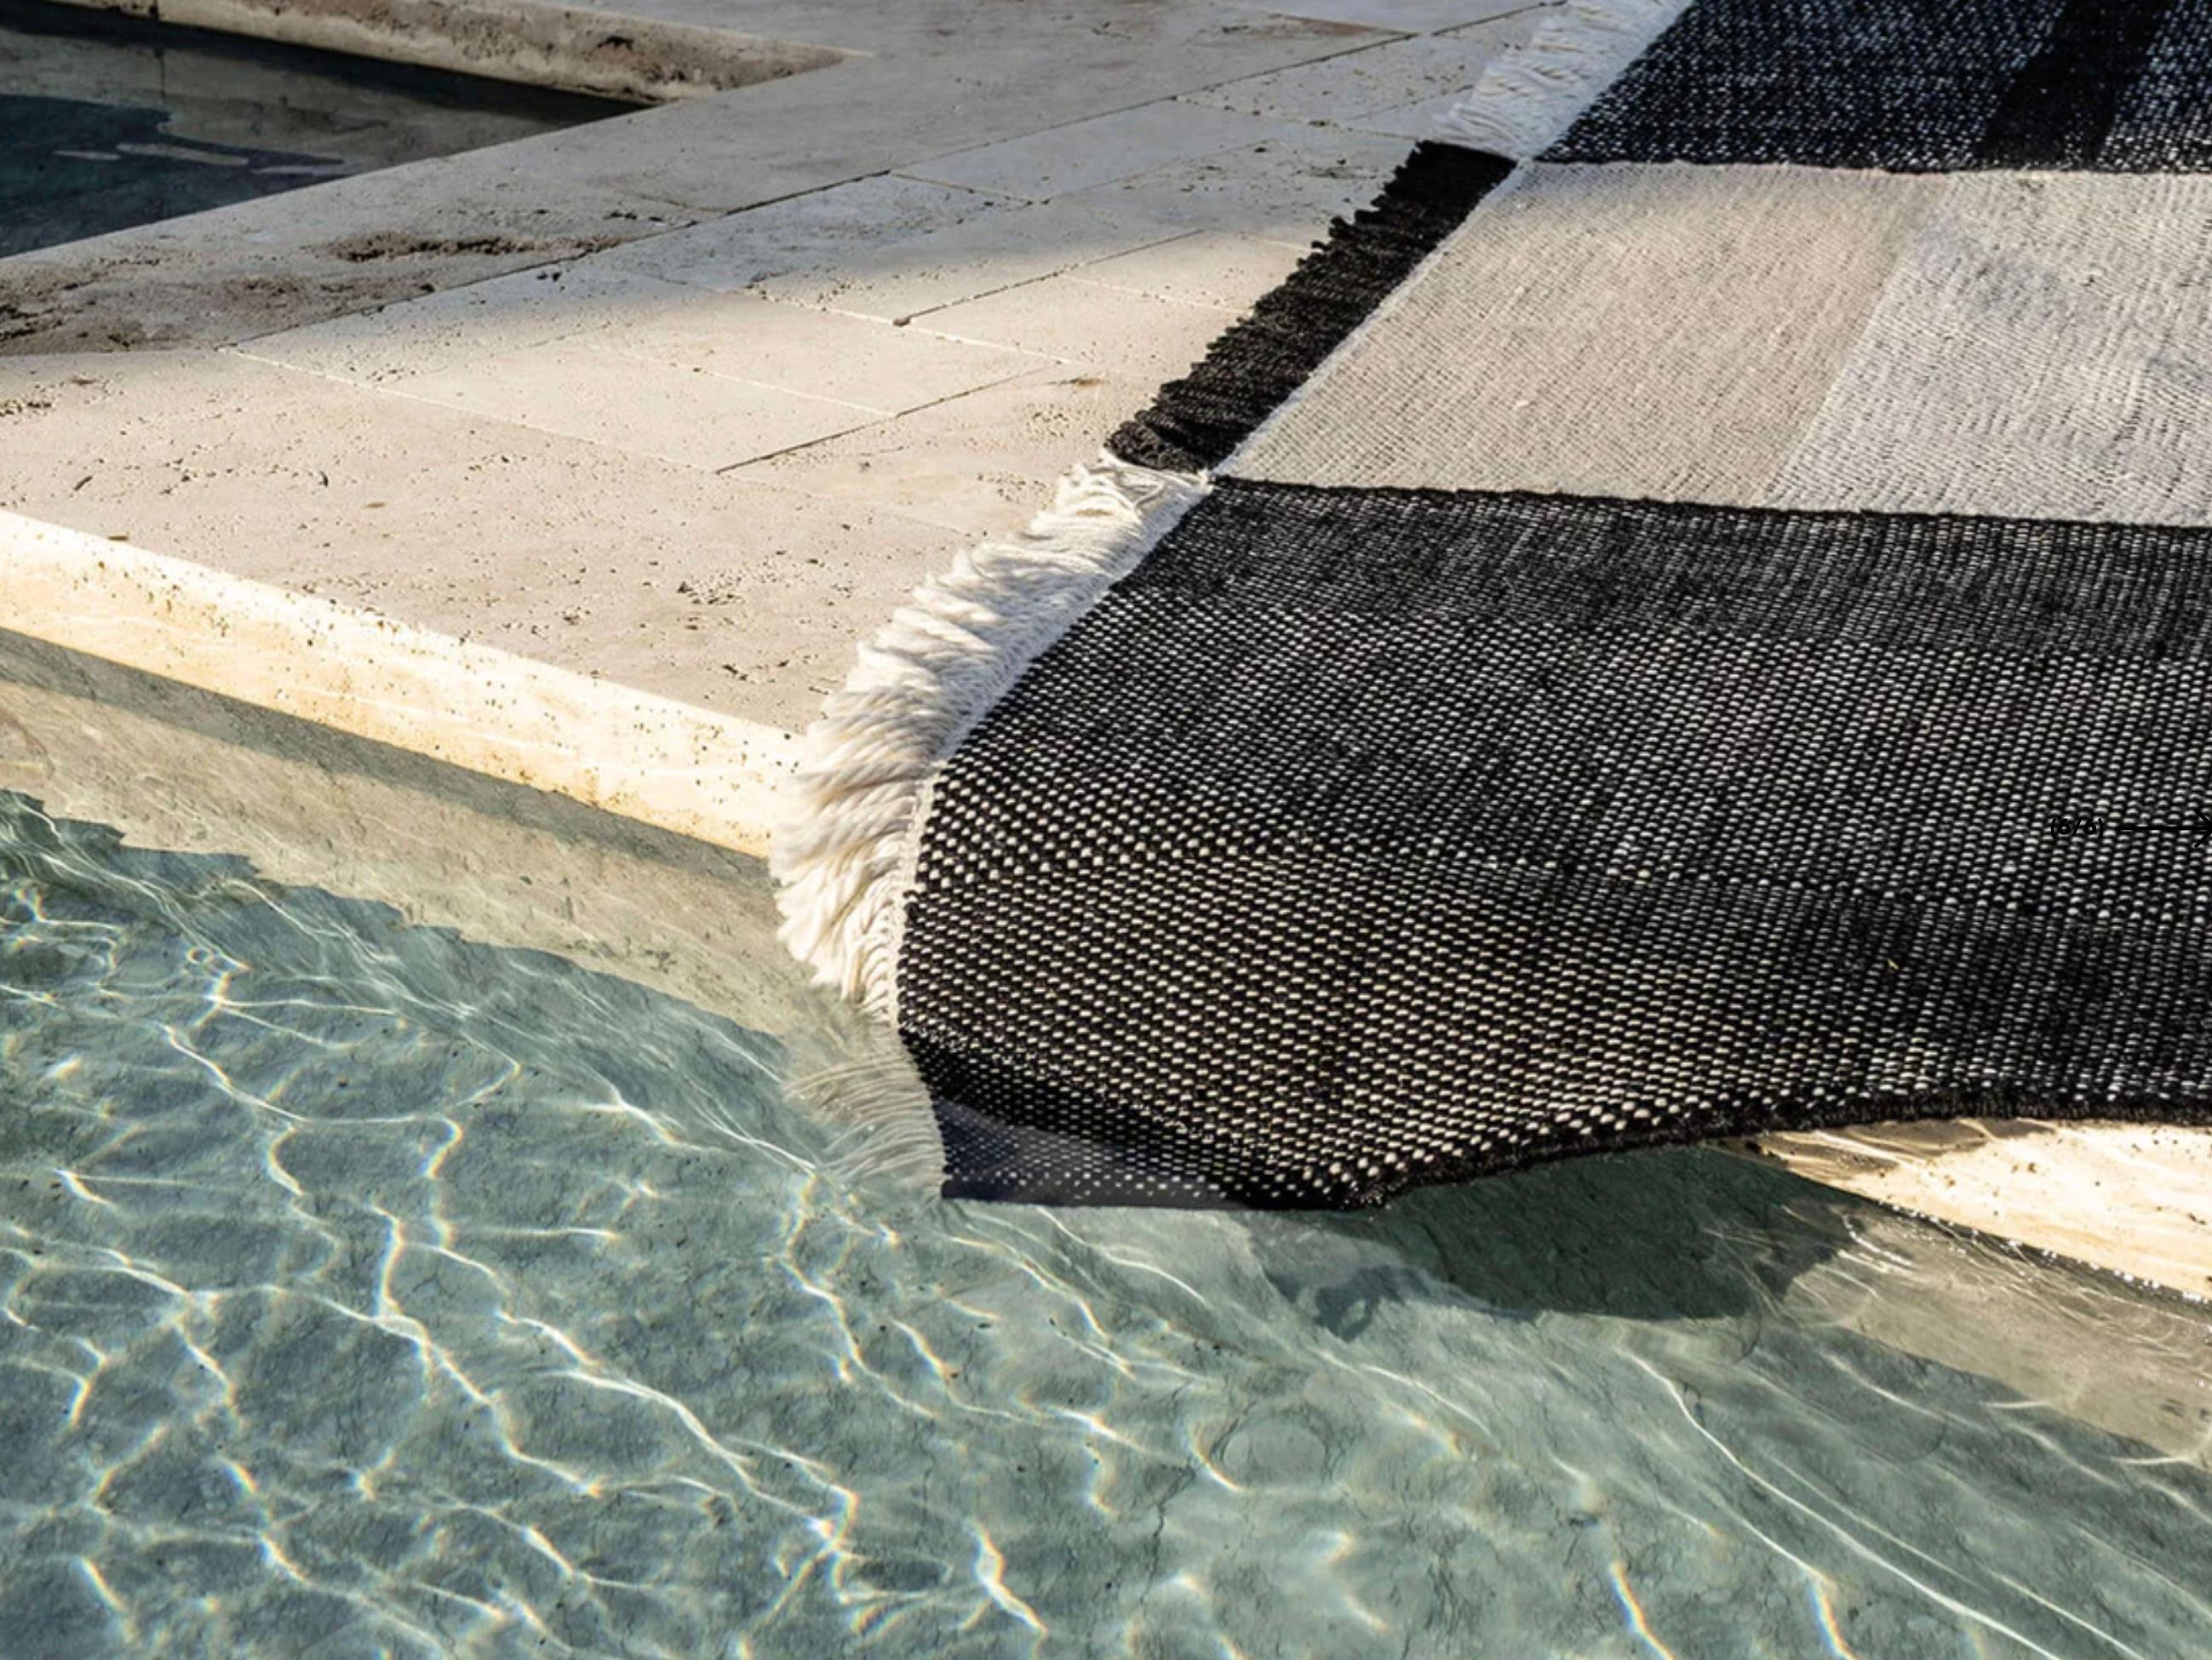 Nani Marquina & Elisa Padrón 'Tres' Outdoor Rug. Current production, Spain. Measures: 250x350cm

Tres Outdoor aims to transfer the warmth of the iconic Tres collection to the outdoor world. Made from 100% recycled PET, a material produced through